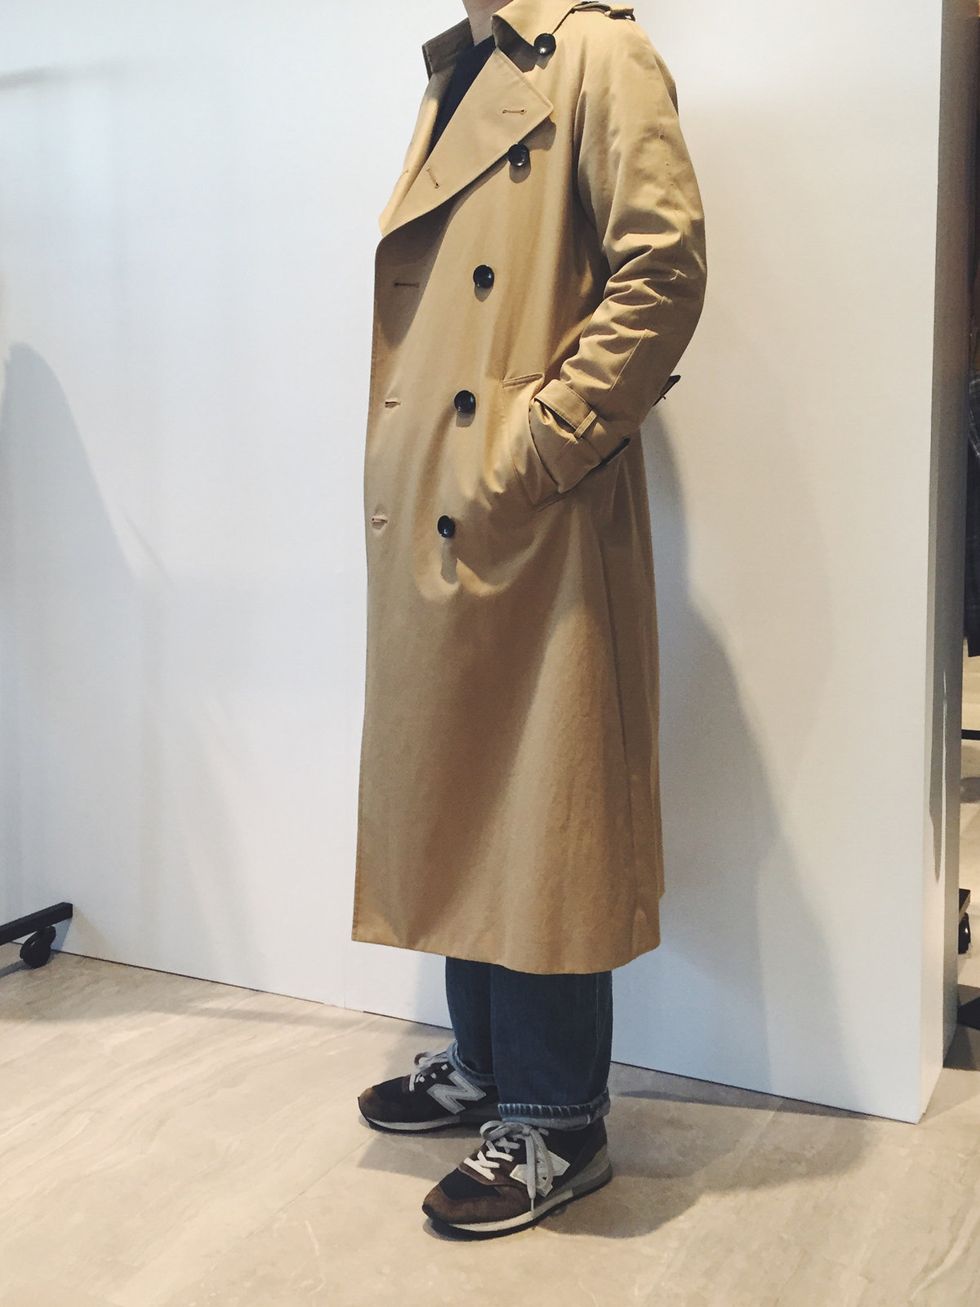 Coat, Trench coat, Clothing, Overcoat, Outerwear, Duster, Beige, Sleeve, Fashion design, Collar, 